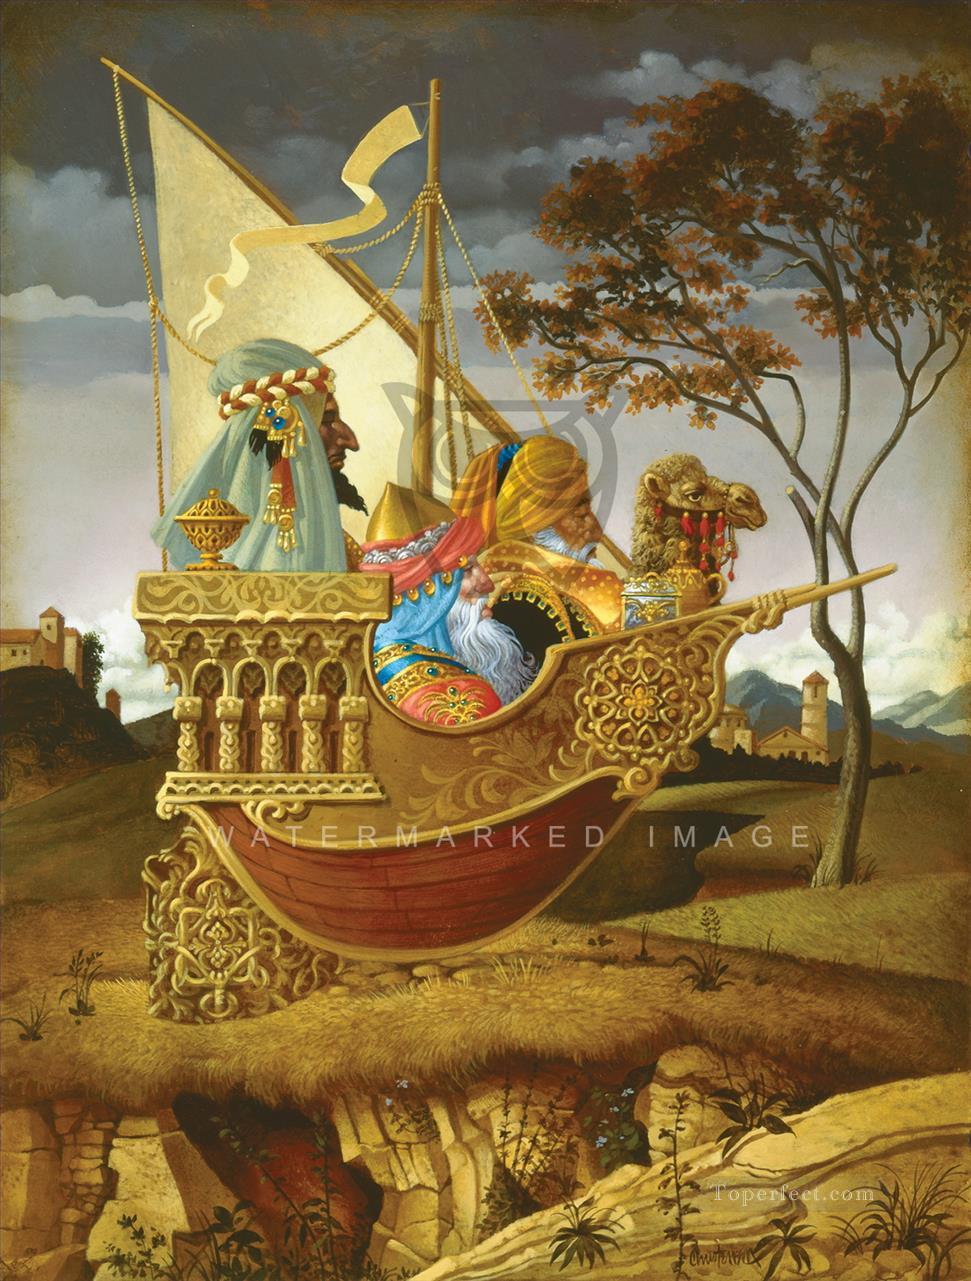 THREE WISE MEN IN A BOAT Fantasy Oil Paintings